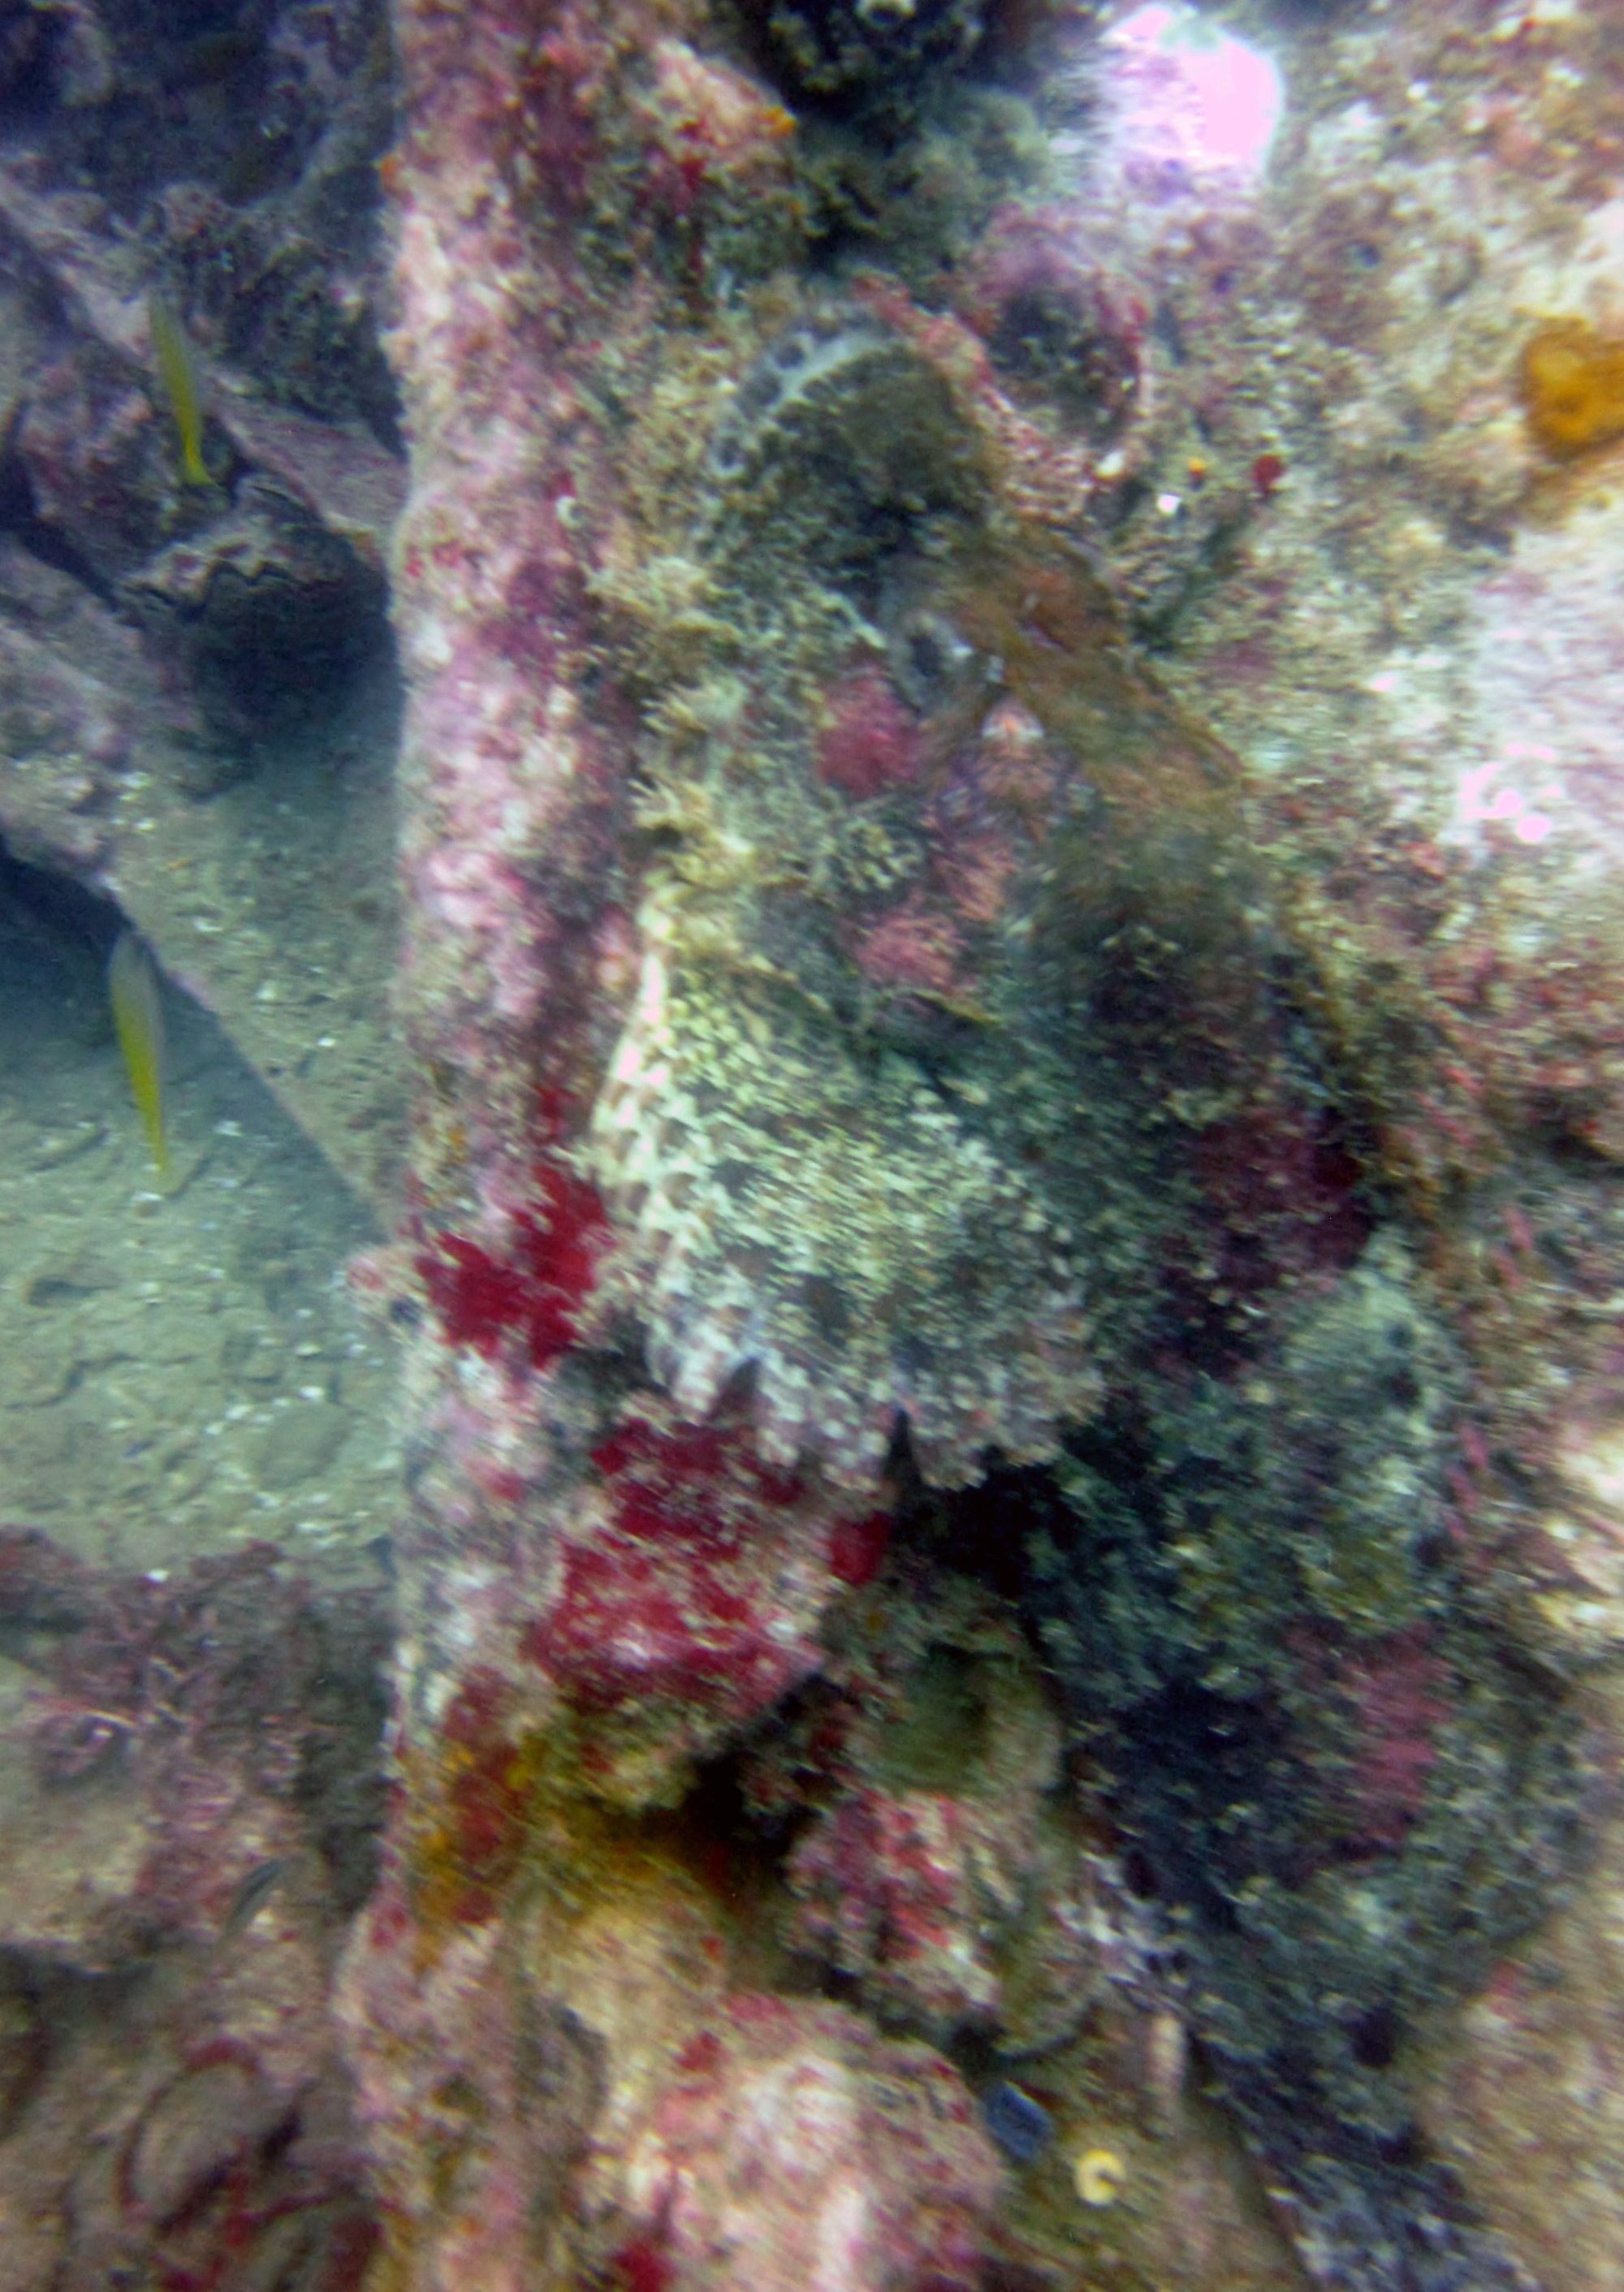 Coral covered superstructure